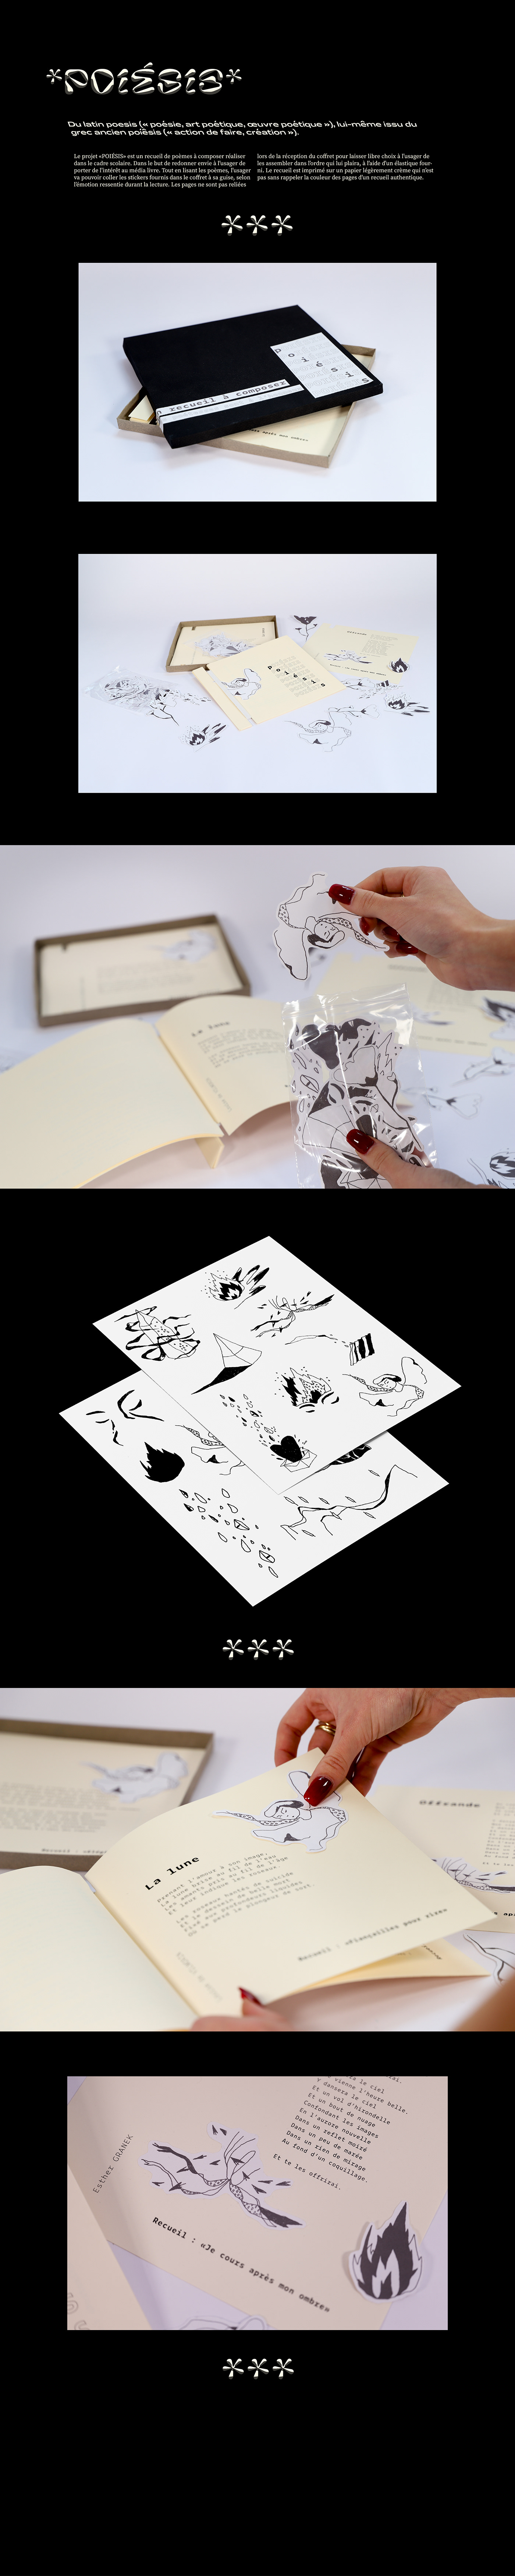 designgraphique edition editorial graphicdesign graphisme mise en page stickers